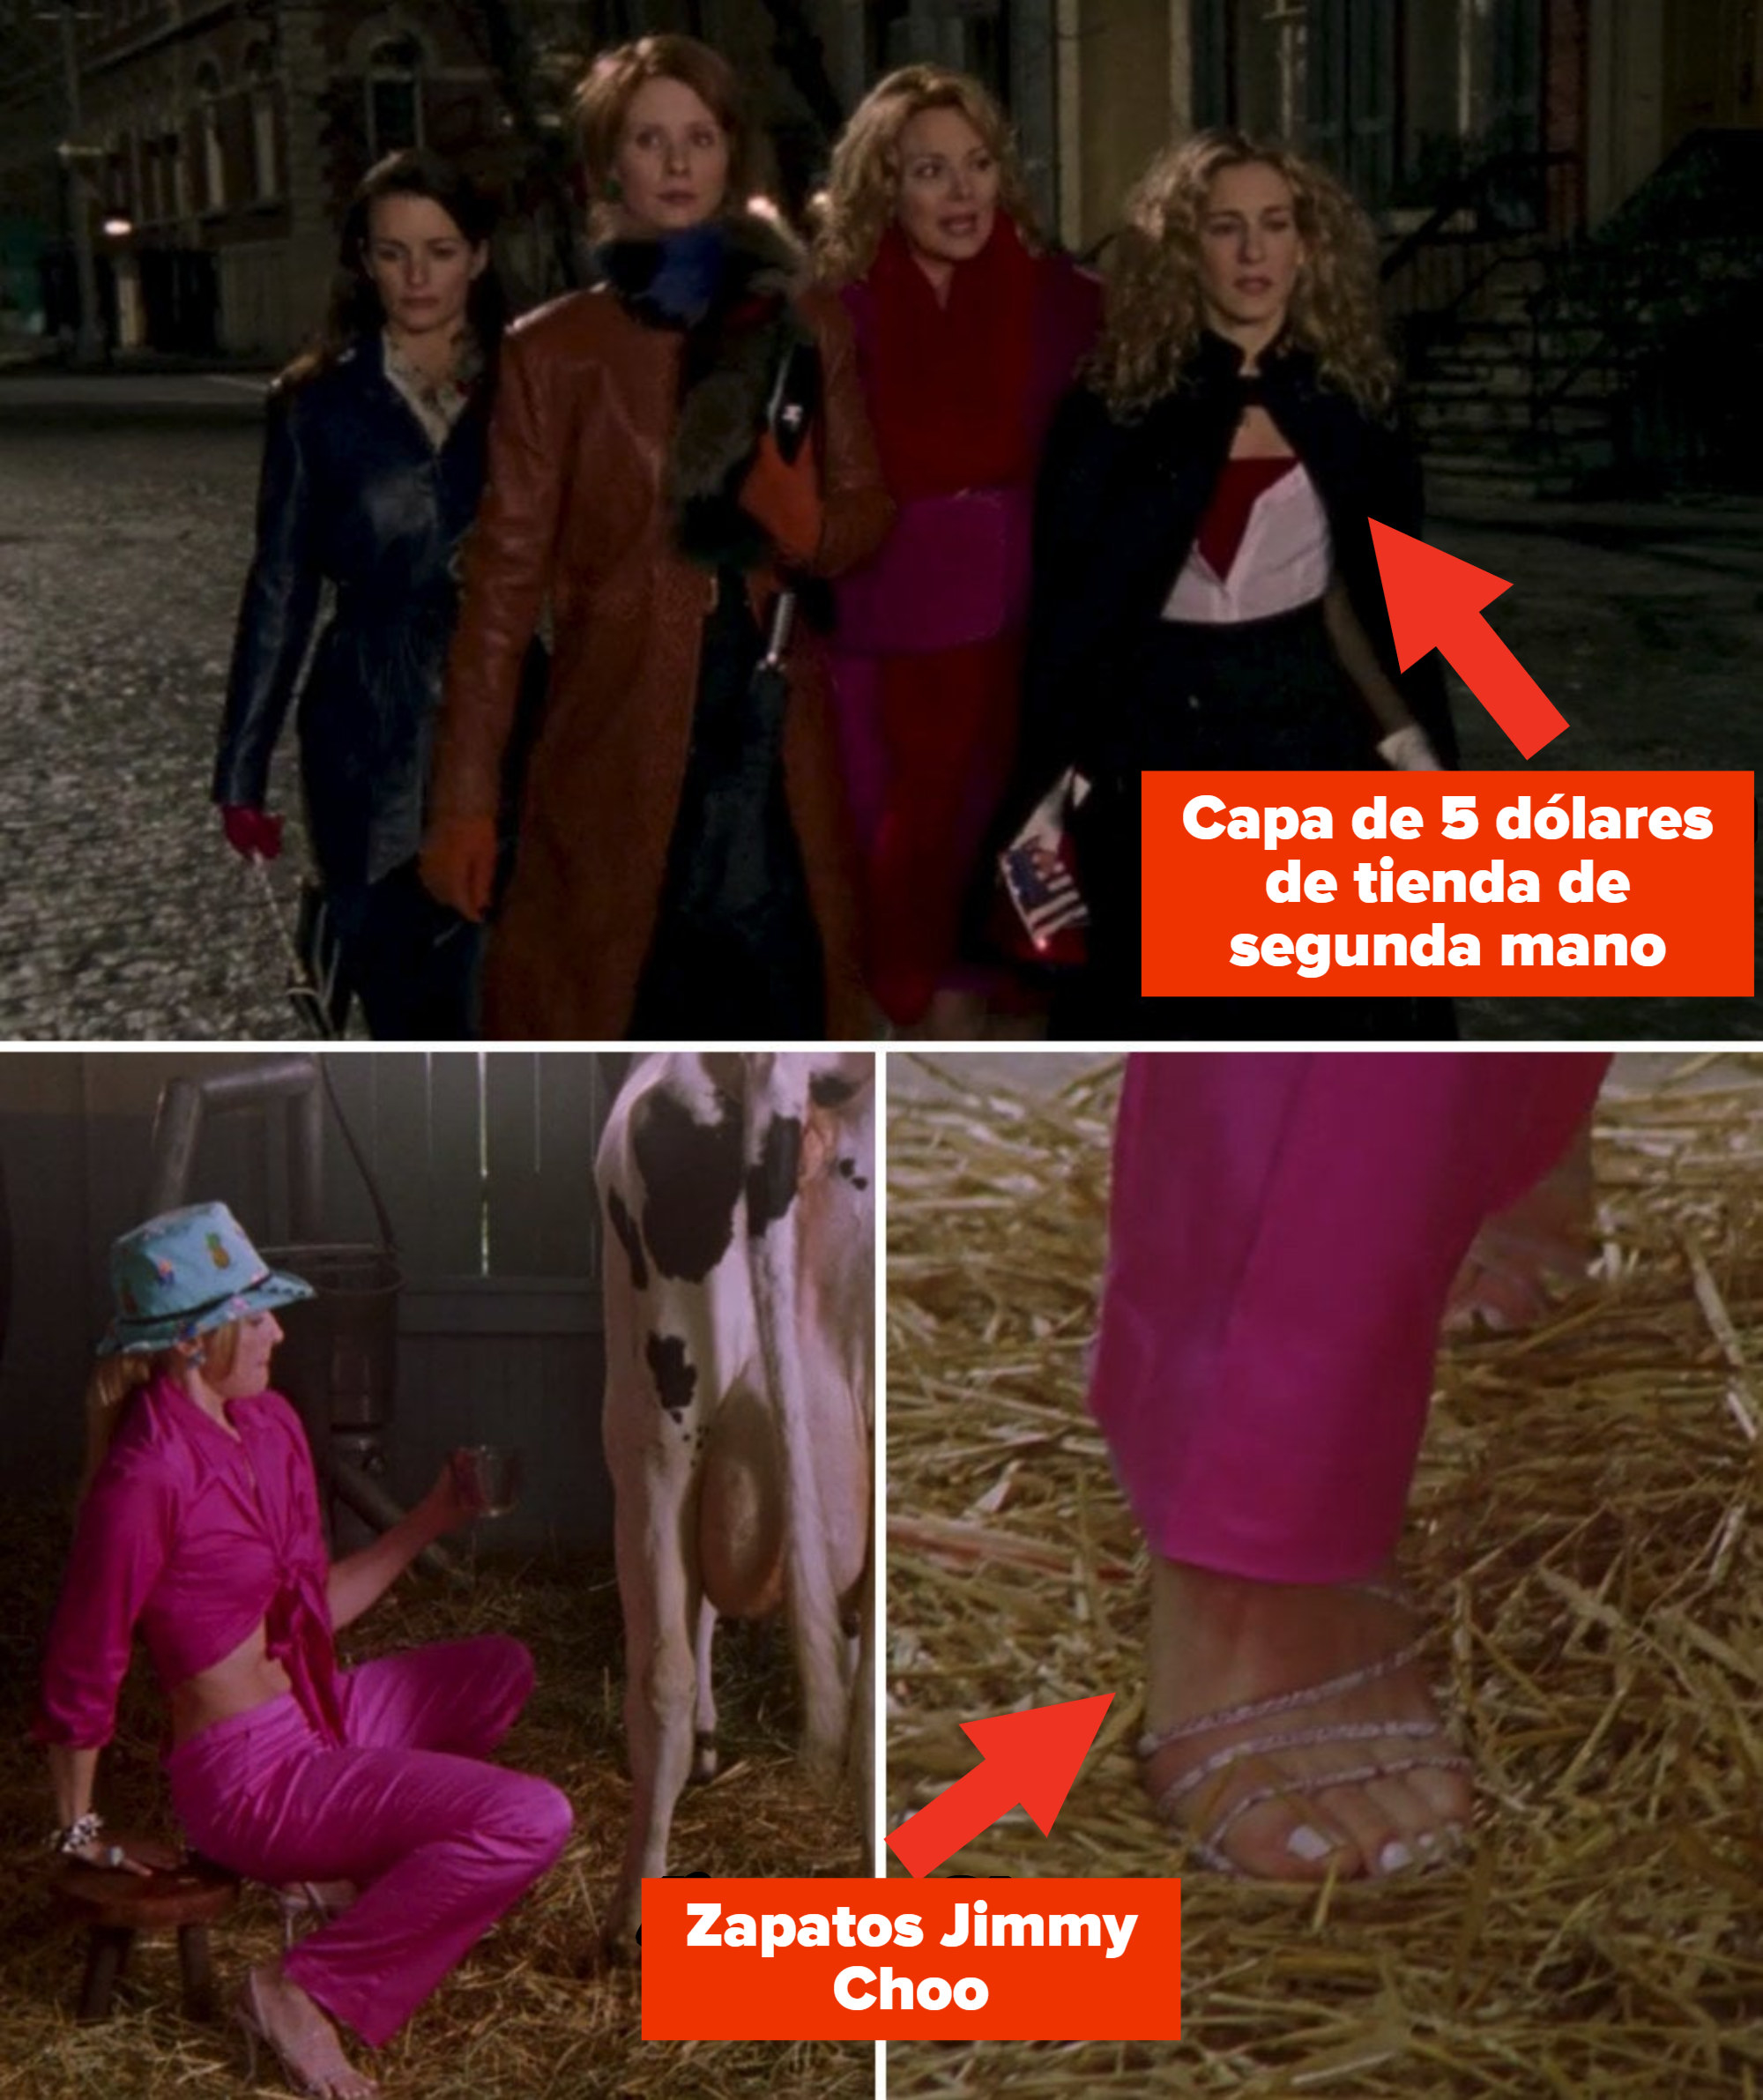 Miranda, Samantha, Carrie, and Charlotte in the middle of the street walking to a party; Samantha trying to milk a cow while wearing Jimmy Choo shoes